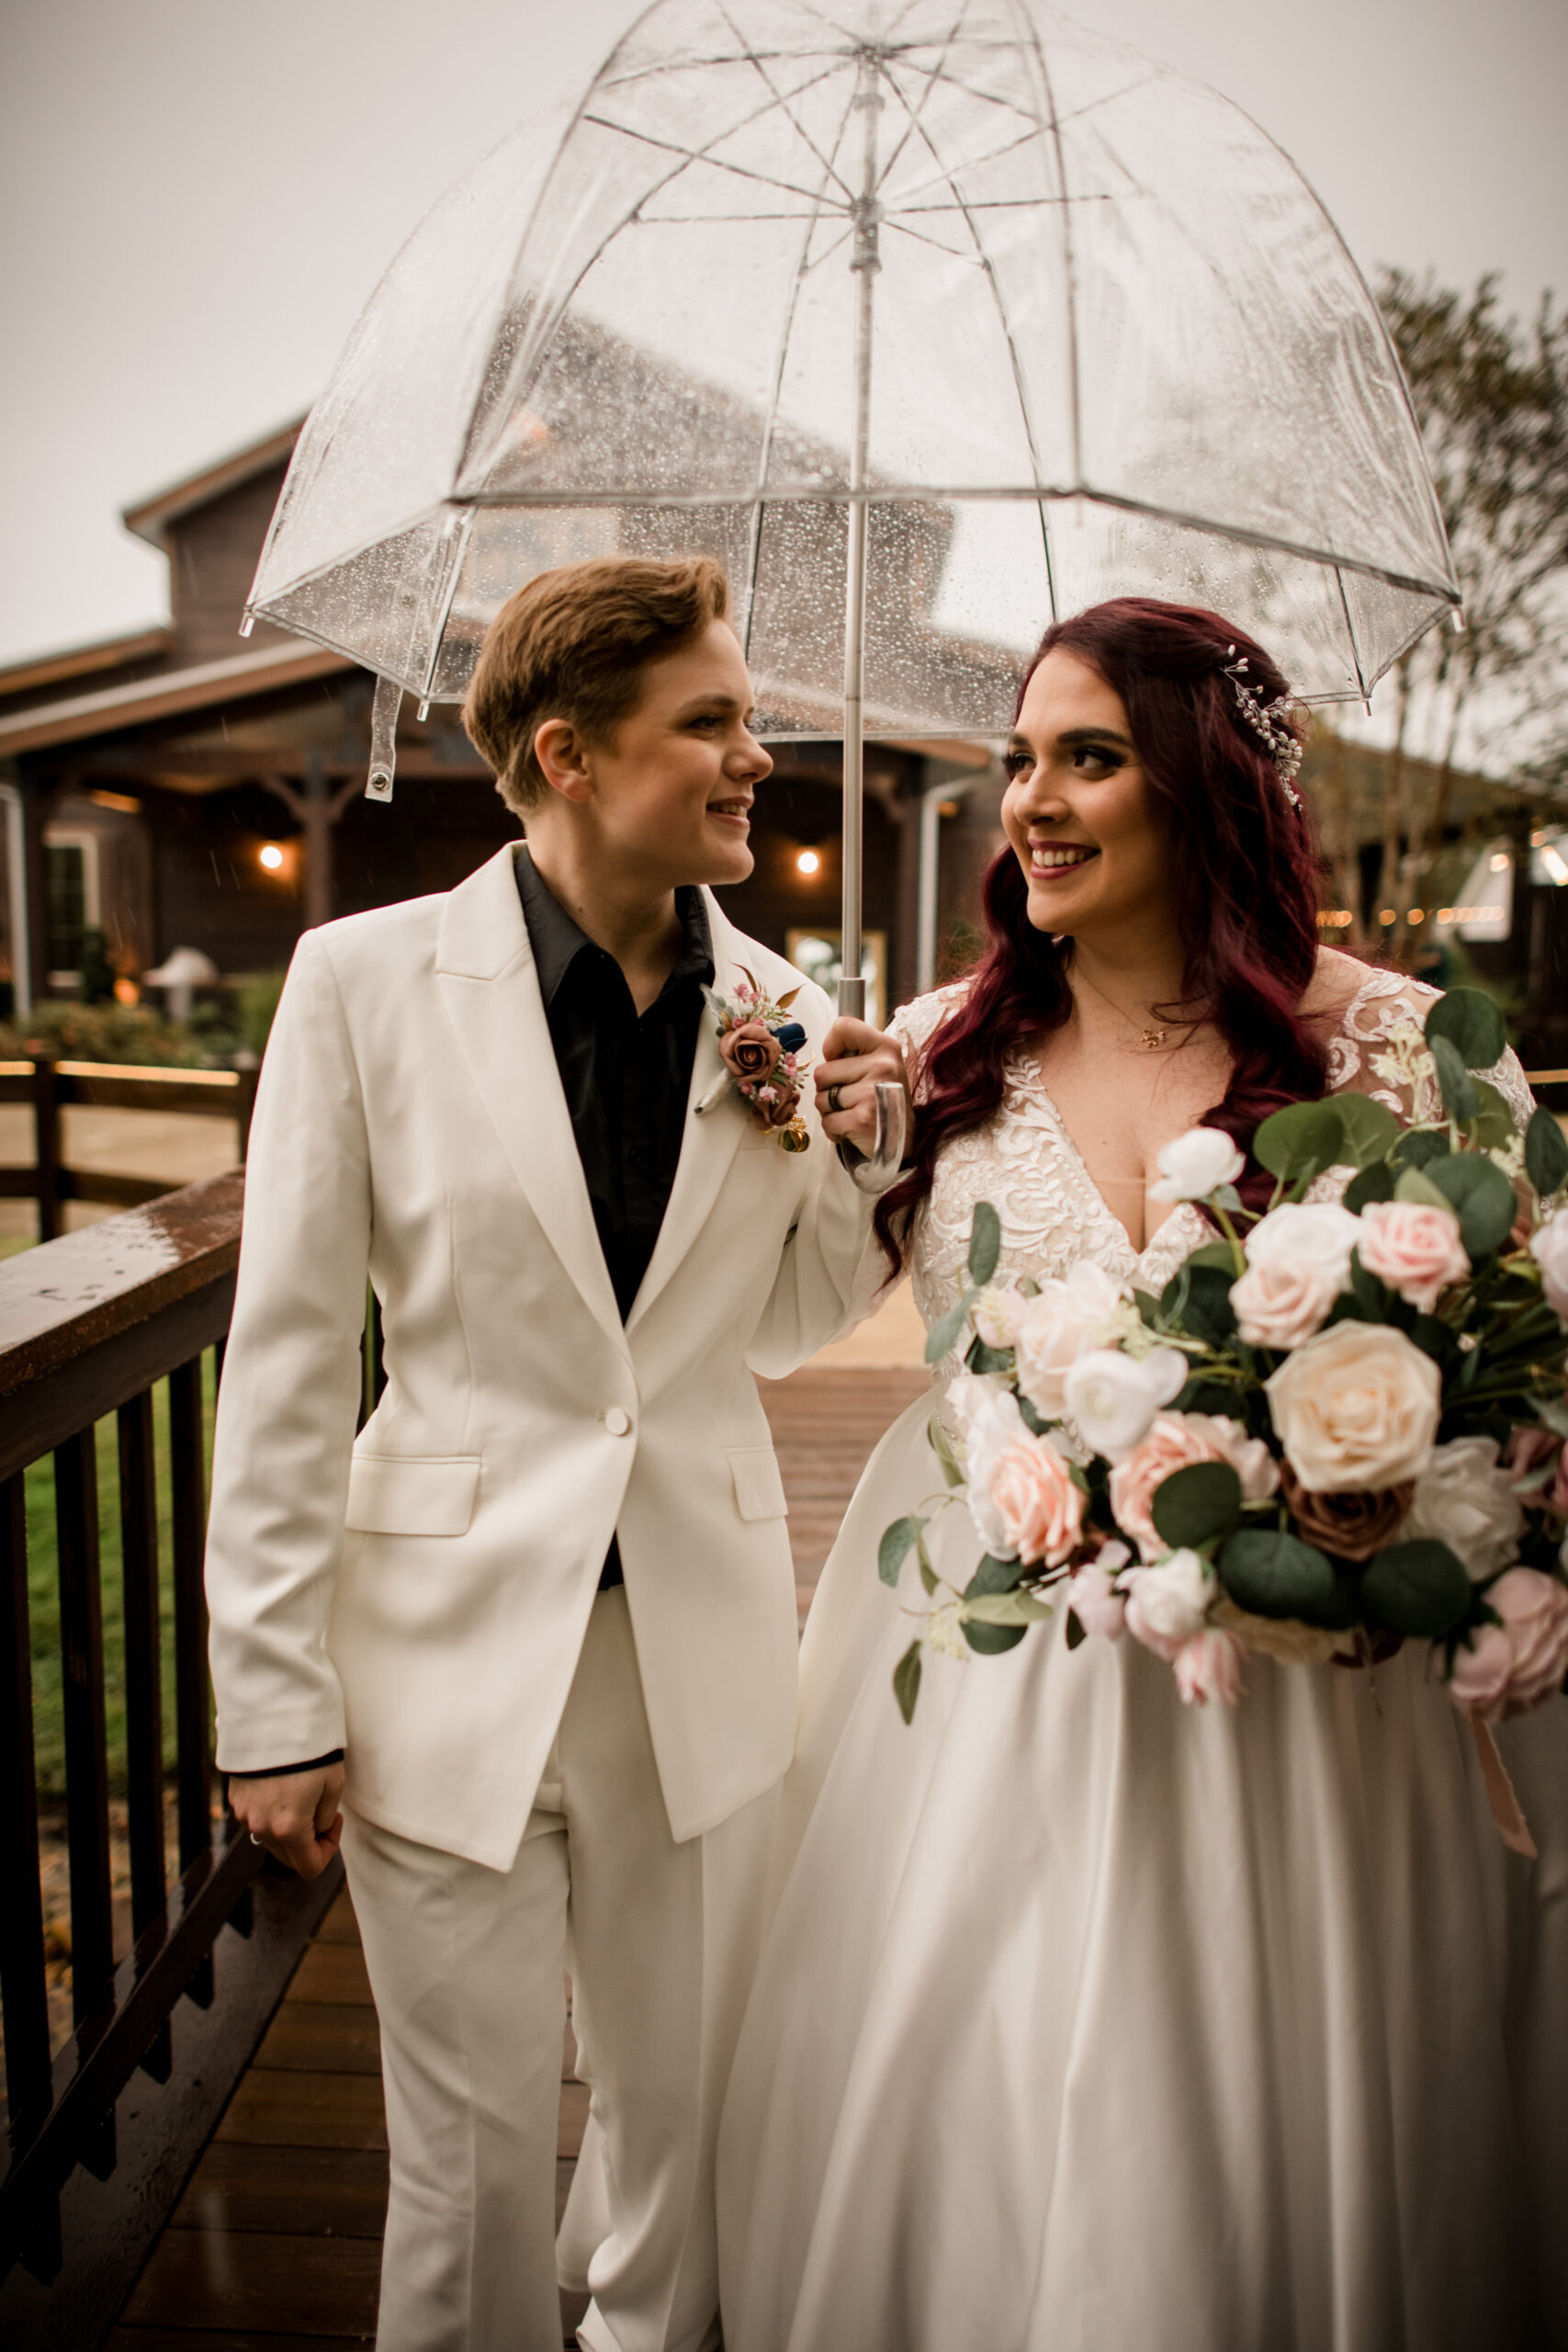 Same sex couple smiling at each other holding a pink and peach colored bouquet, one with light brown hair wearing a mustard jacket and white shirt and the other with raven colored hair wearing a cranberry colored jacket over a white wedding gown photo by Wedding Photographer in Houston, Jamie Hardin Photography